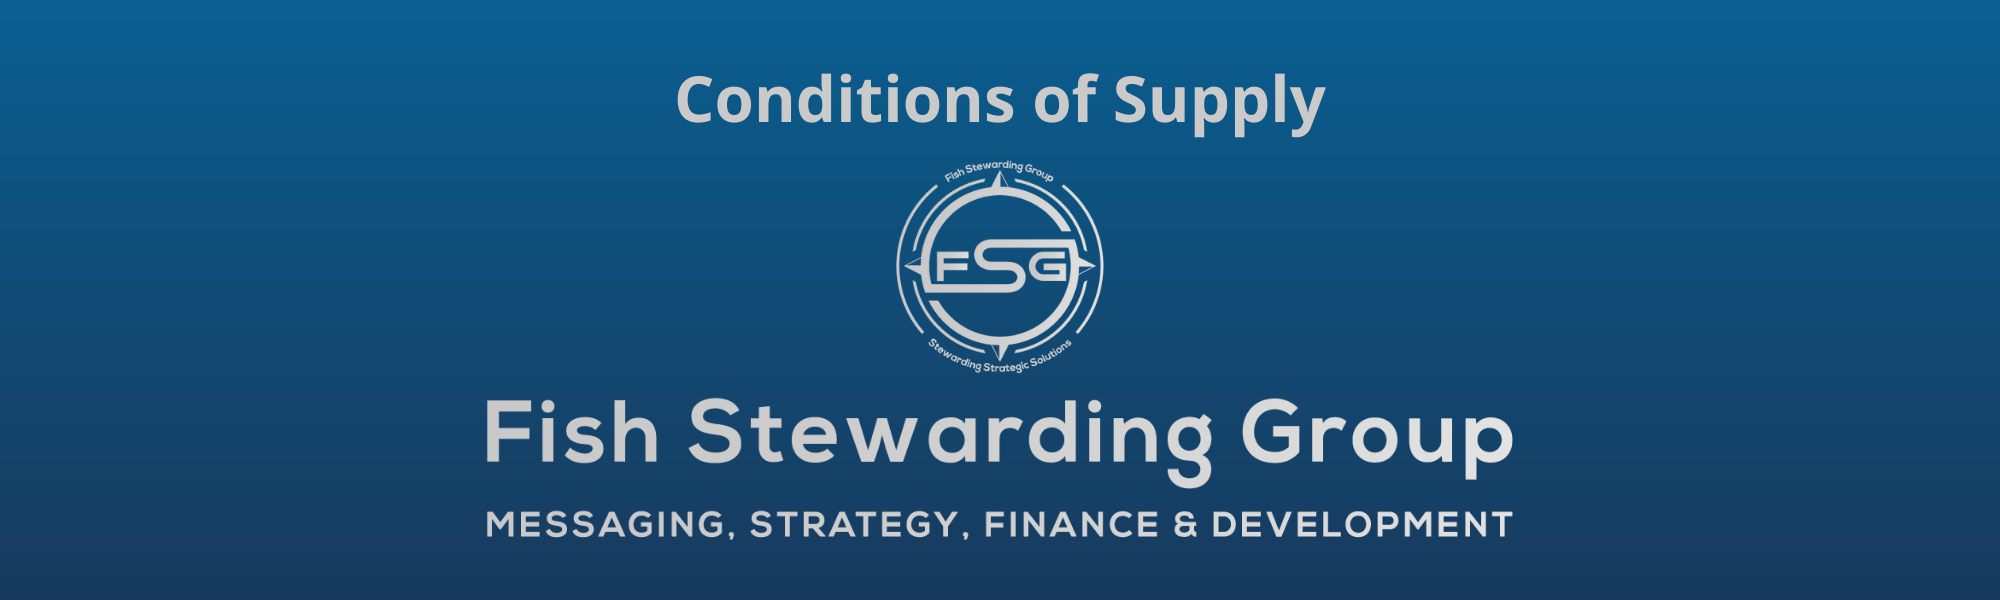 A thin rectangular Footer graphic for the Conditions of Supply page. The background is a blue gradient color that goes from a dark blue on the bottom to a lighter blue on top. The text in gray on top reads Conditions of Supply and FAQs. The text in gray on the bottom center reads: Fish Stewarding Group and beneath that, the text reads Messaging, Strategy, Finance and Development. In the center above the text is the FSG logo in gray. The logo has the letters FSG in the middle with a circle with four pointed arrows facing north, south, east and west with the S connected to that circle. Four rounded lines make the next circle of the circle and the last layer is a thin circle with the text on the Bottom that reads Stewarding Strategist Solutions and on top, the text reads Fish Stewarding Group.